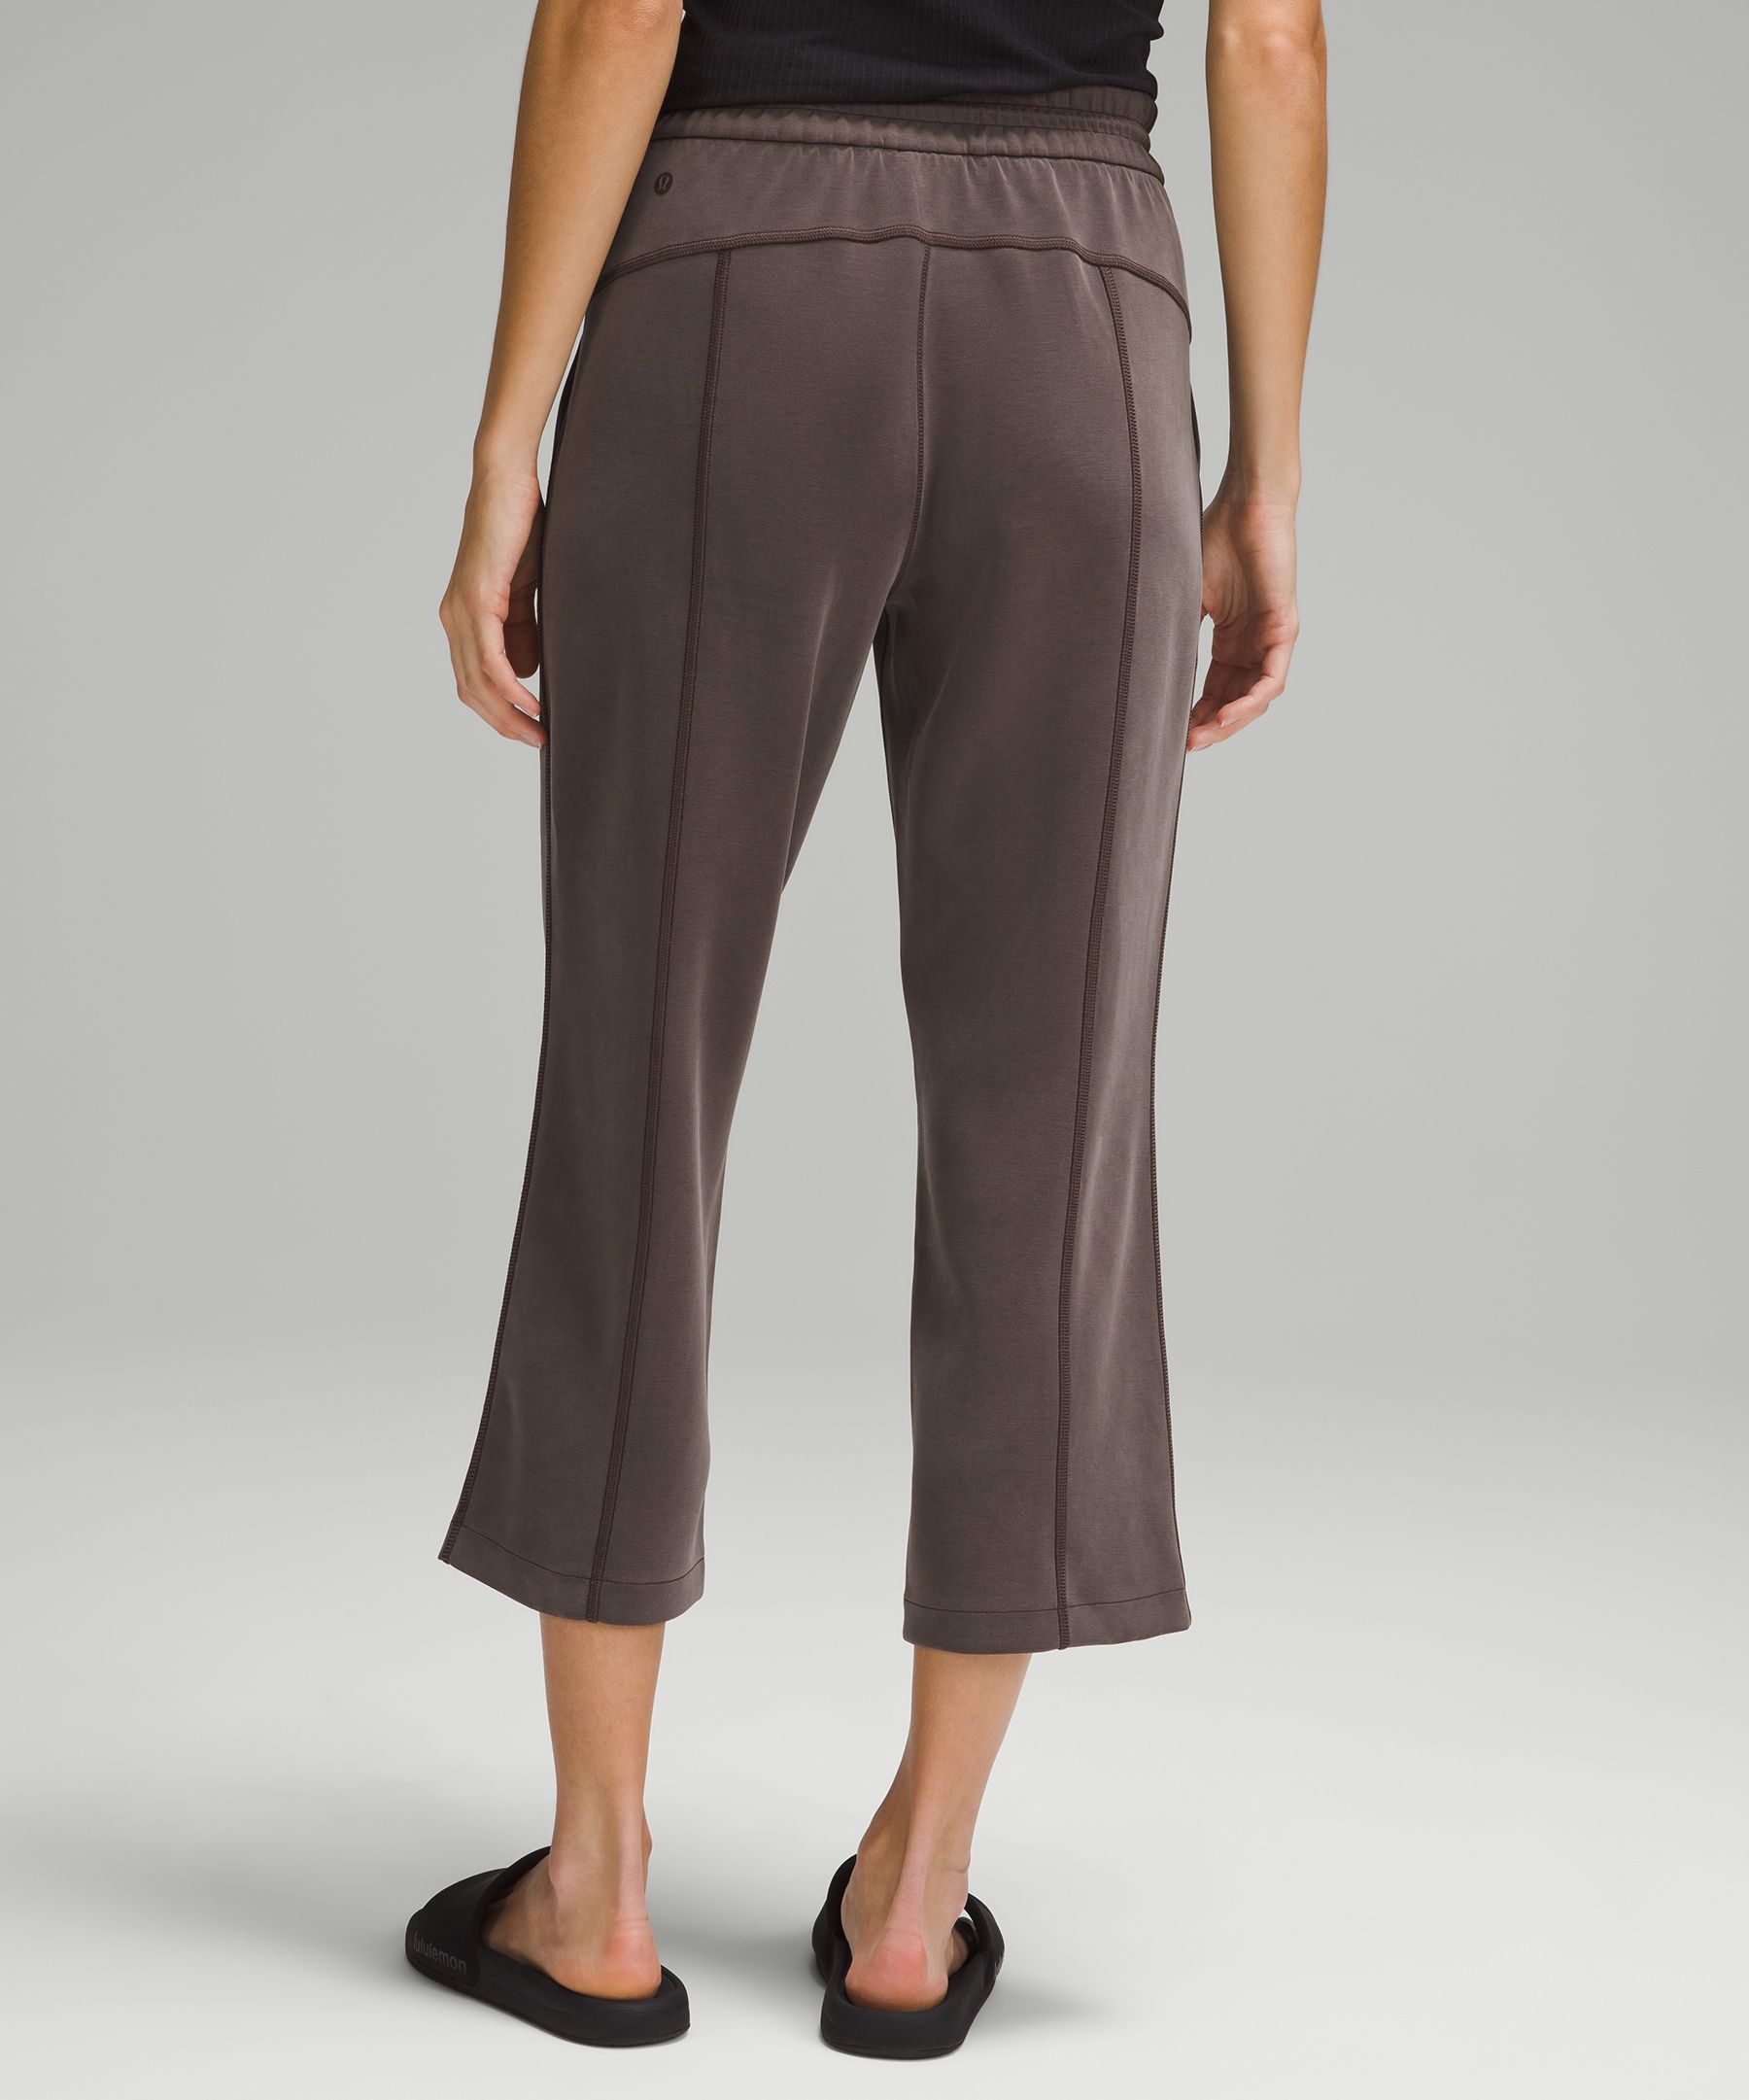 lululemon athletica Lightweight Cropped Pants for Women